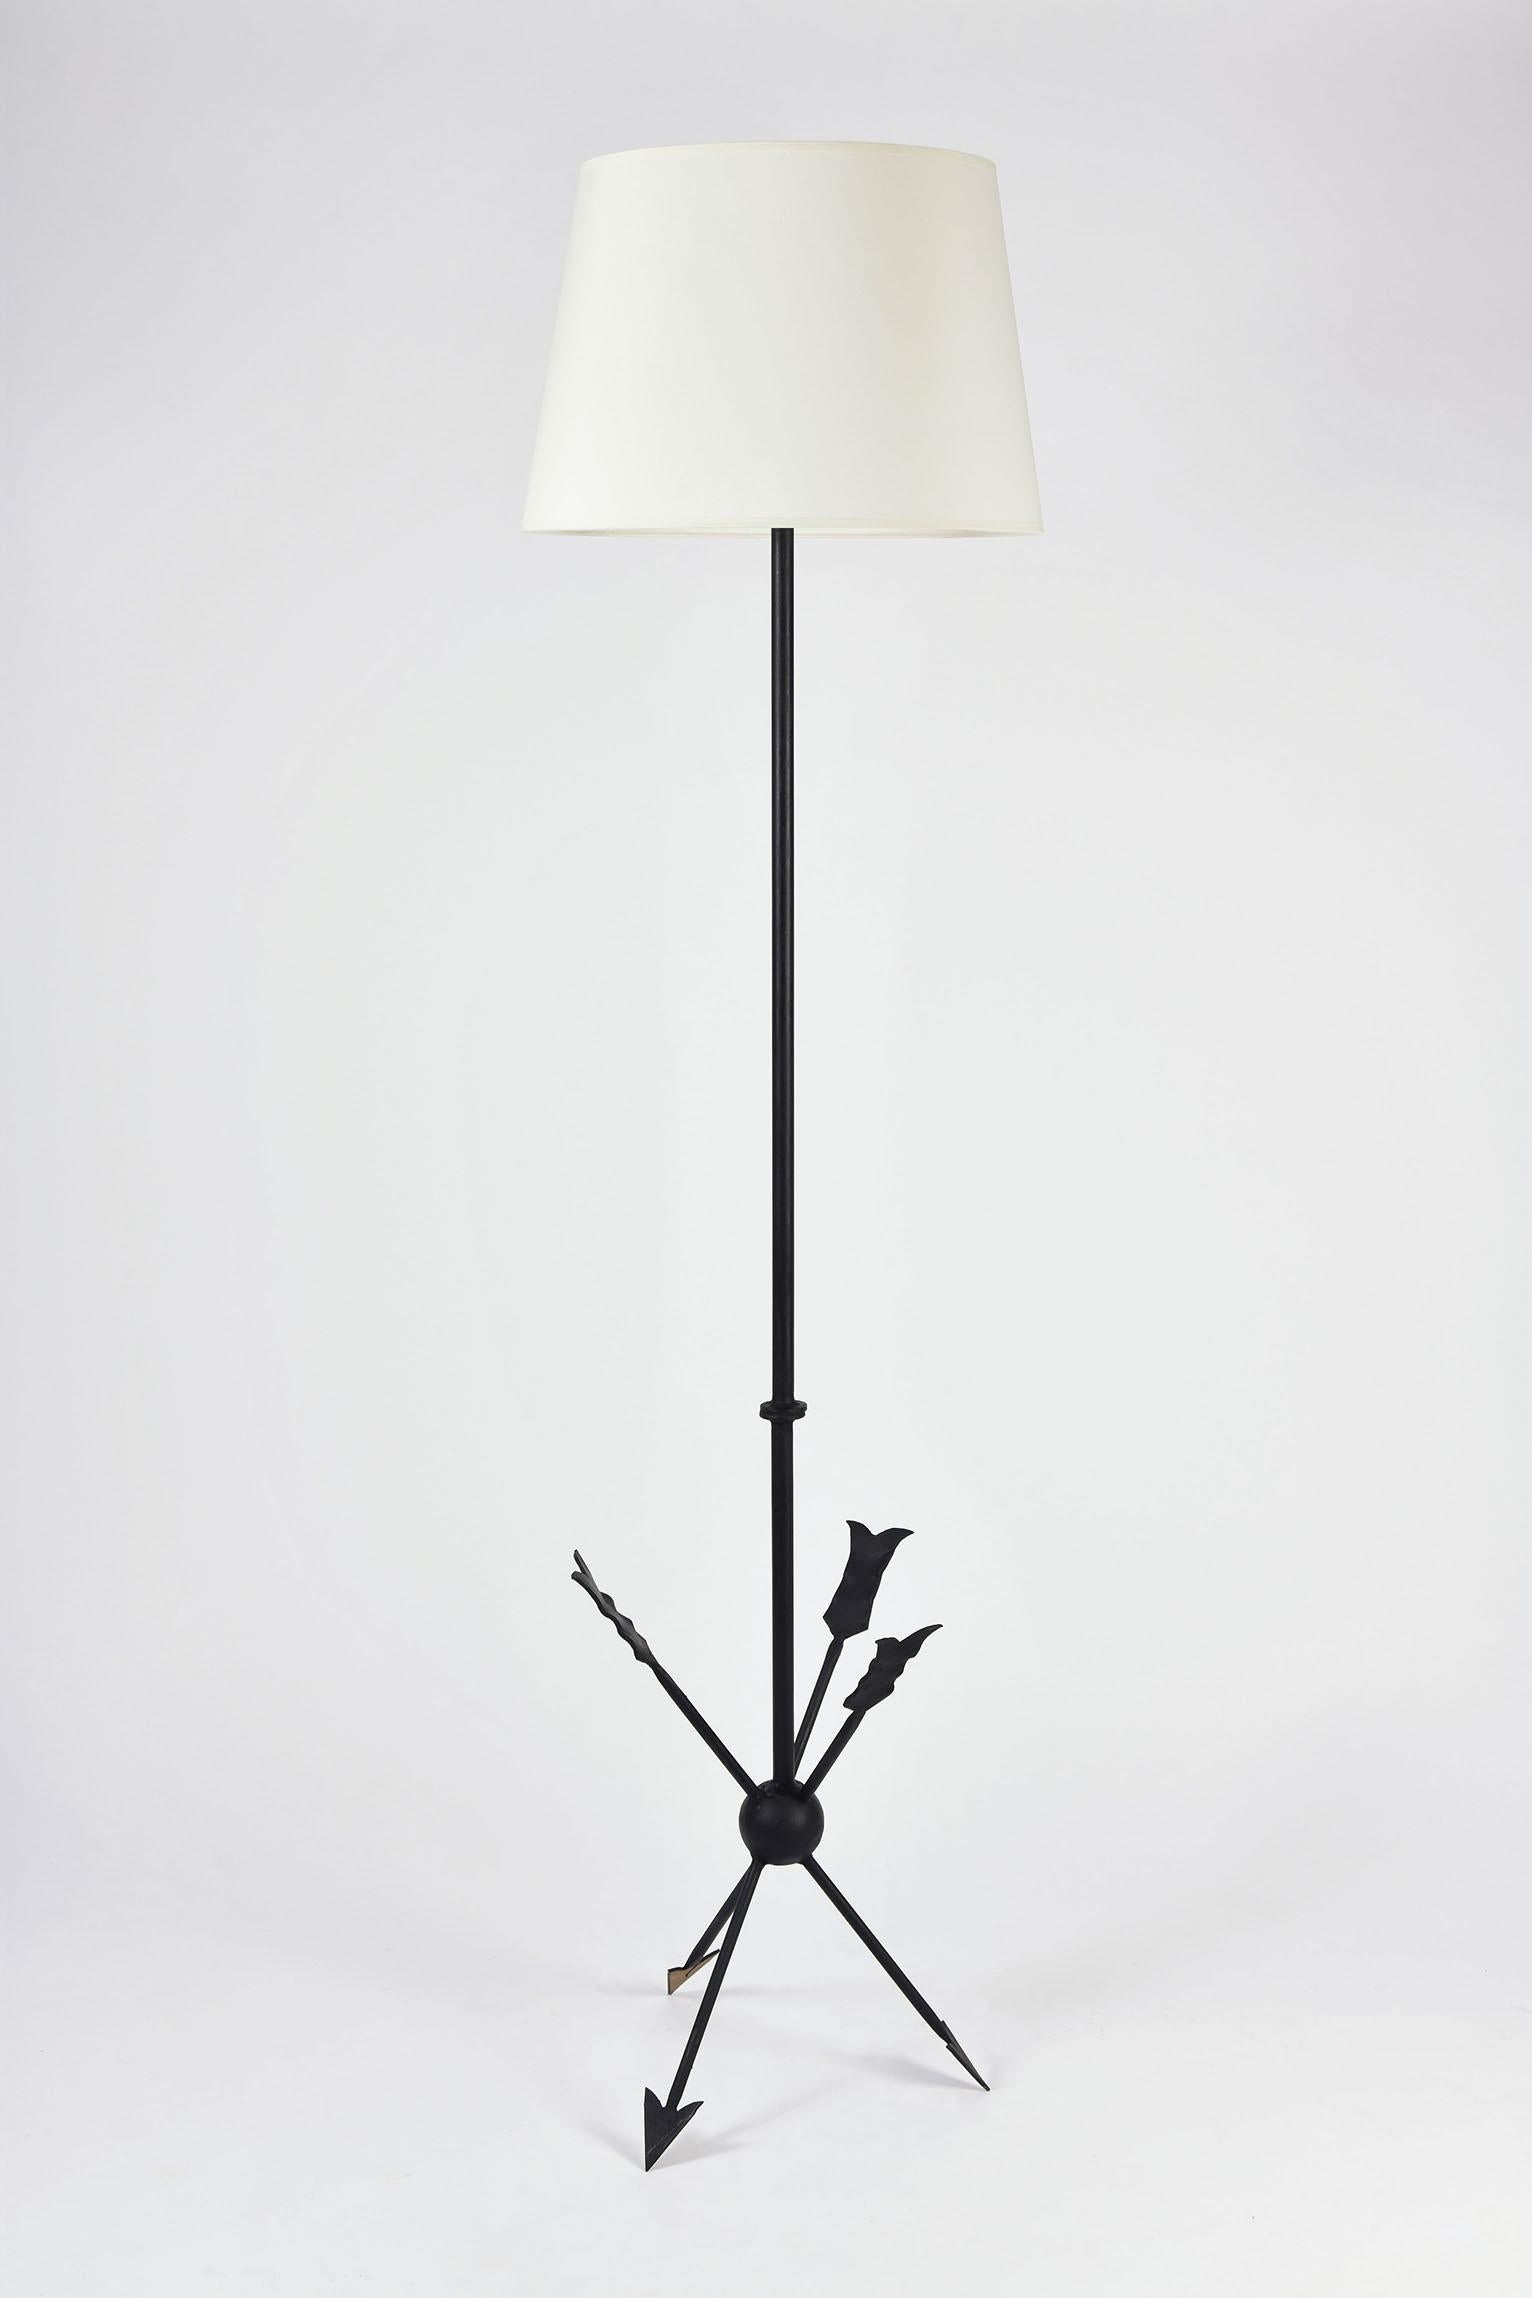 A black enameled wrought iron floor lamp, on an arrow tripod base
France, circa 1940
The stated dimensions include the shade.